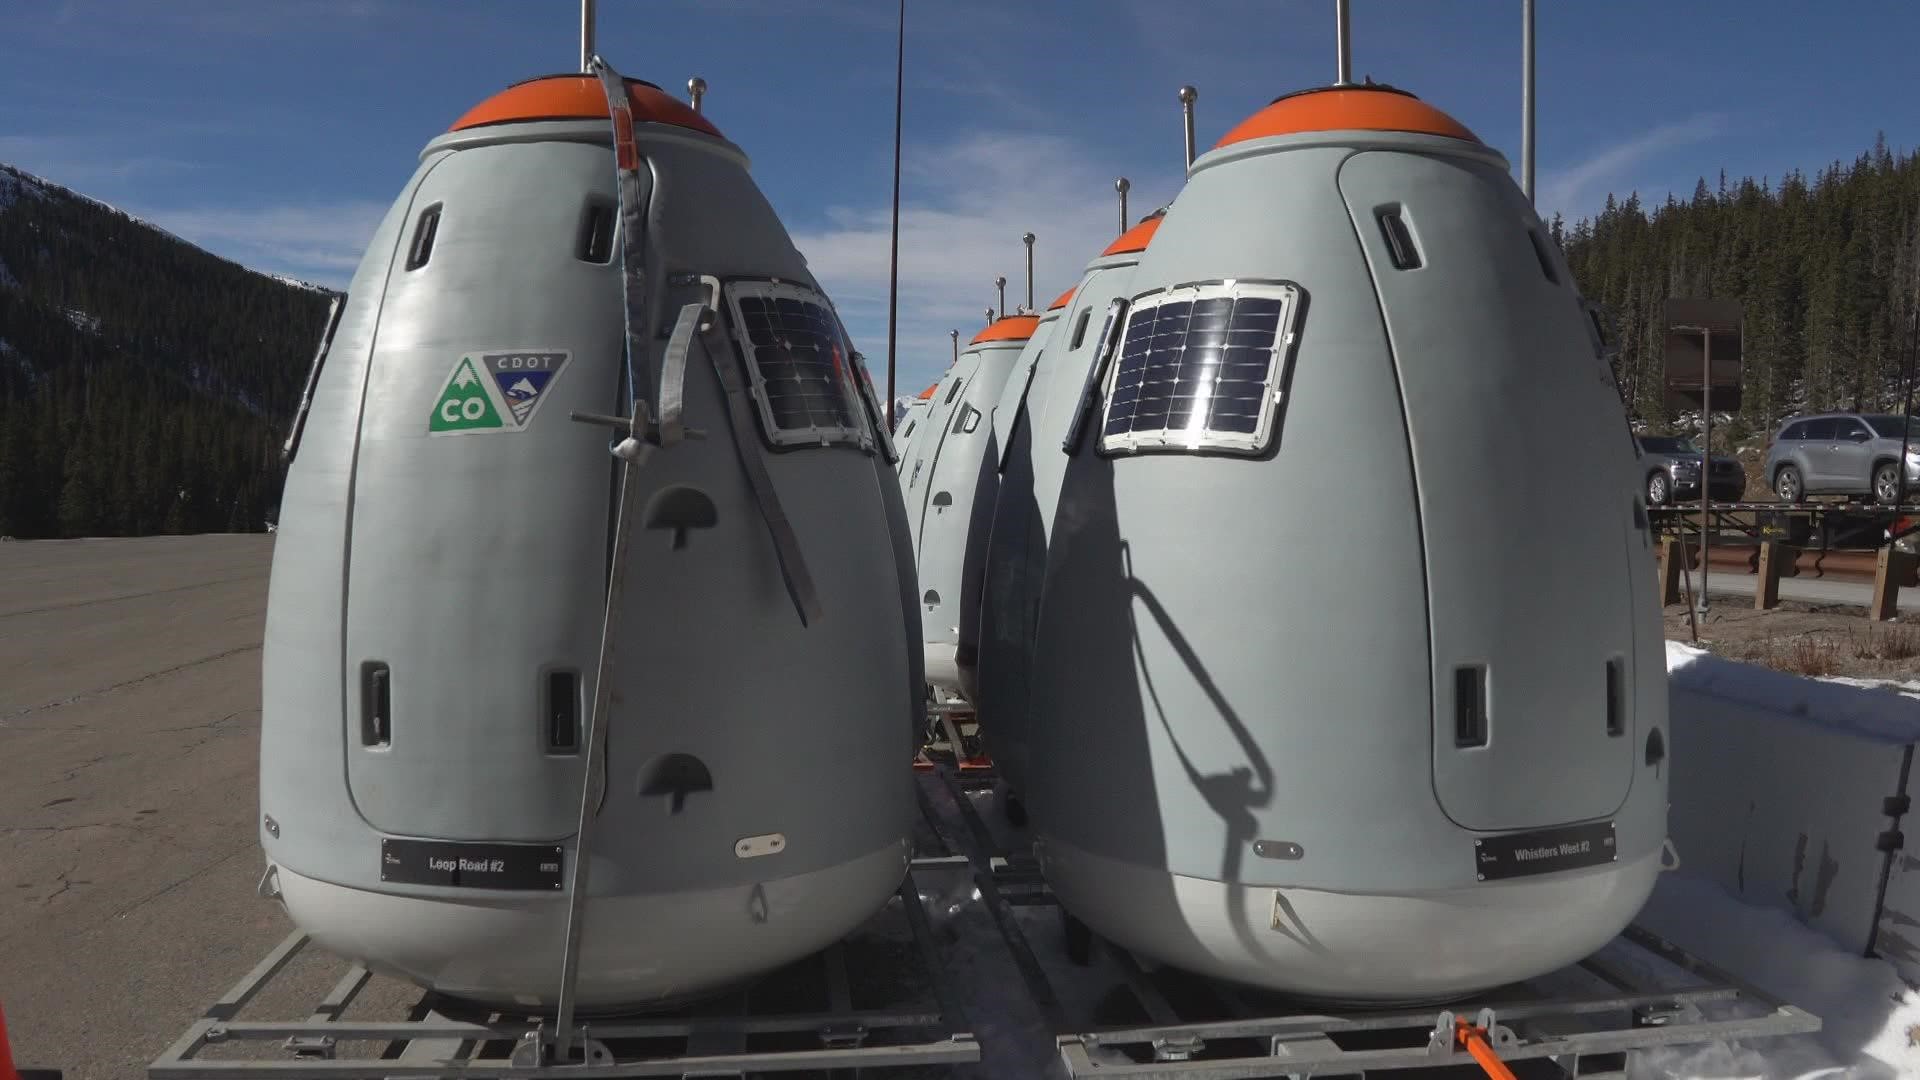 Egg-shaped devices called Gazex Exploders are in place near the Eisenhower-Johnson Tunnels and are ready to be flown to the top of the mountain for avalanche control